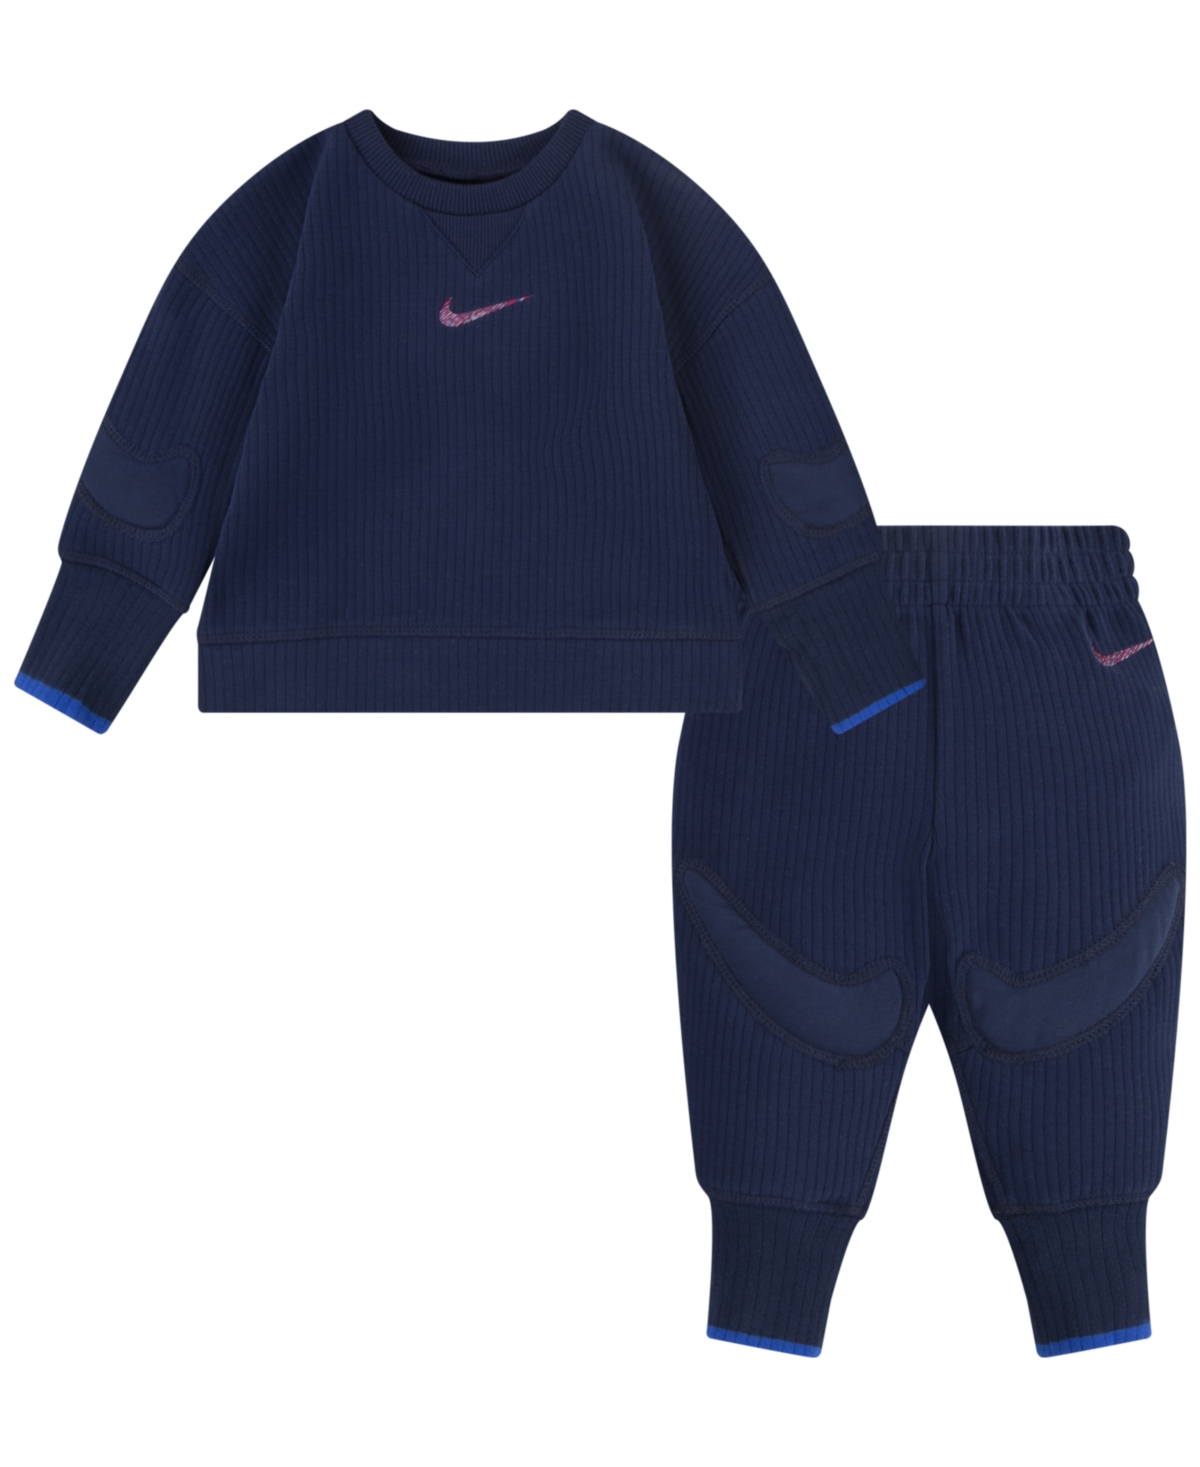 NIKE BABY BOYS AND GIRLS "READY, SET" CREW TOP AND PANTS, 2 PIECE SET